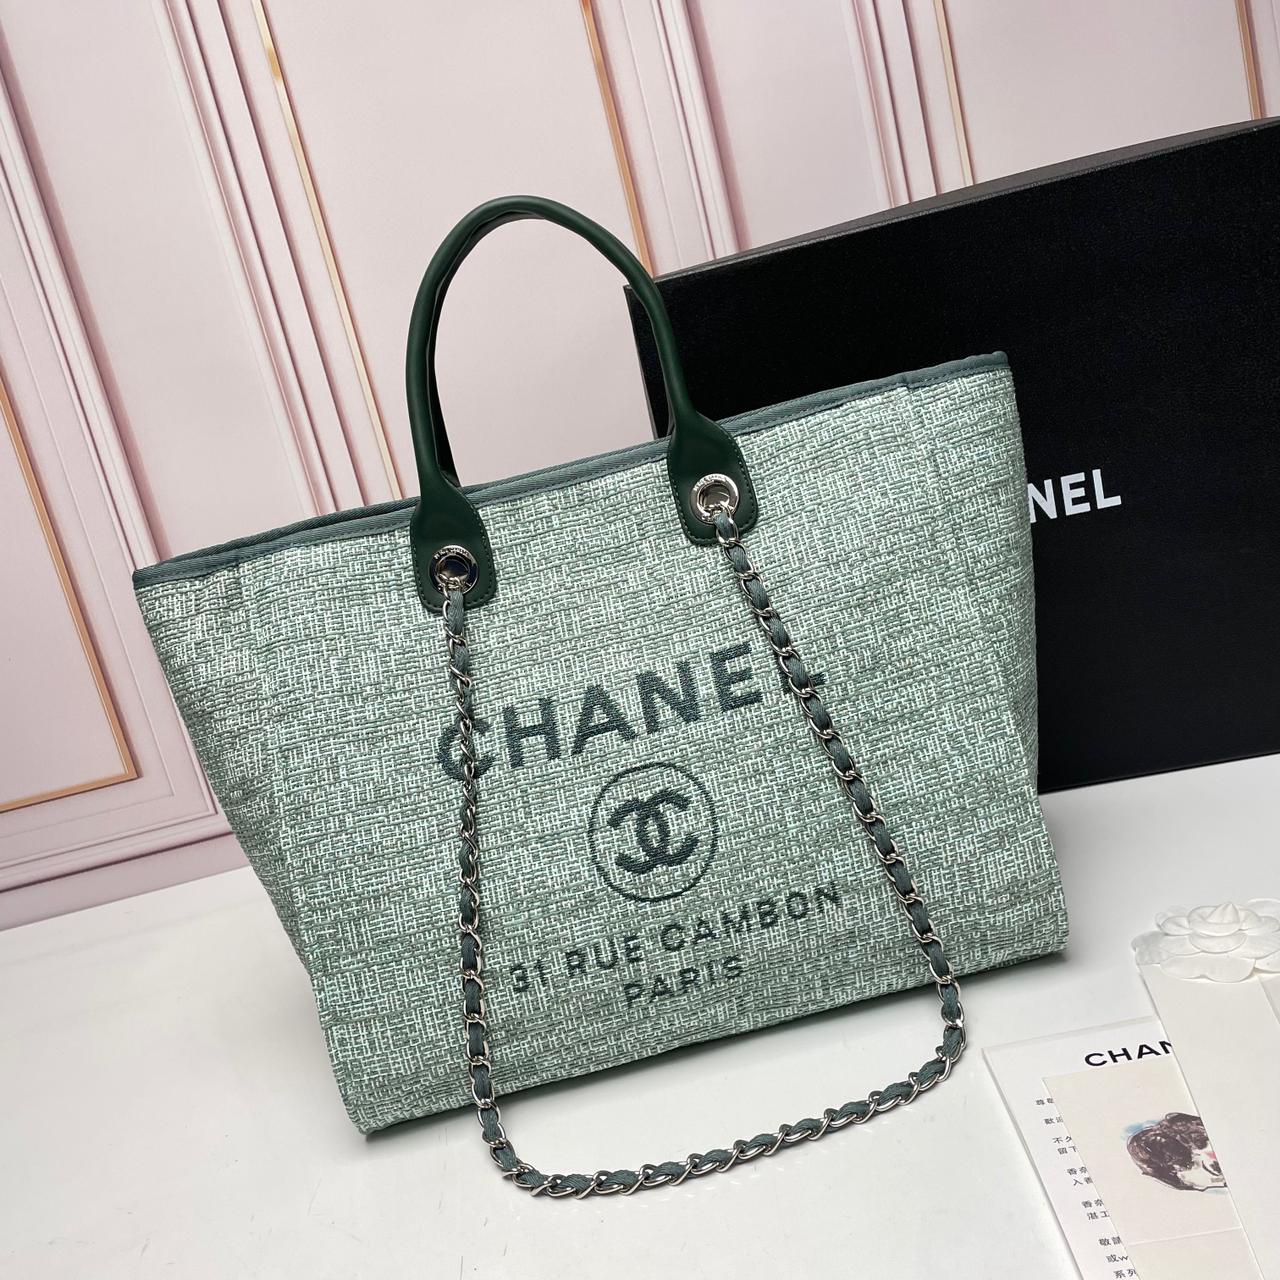 CHANEL TOTE LARGE BEIGE CANVAS